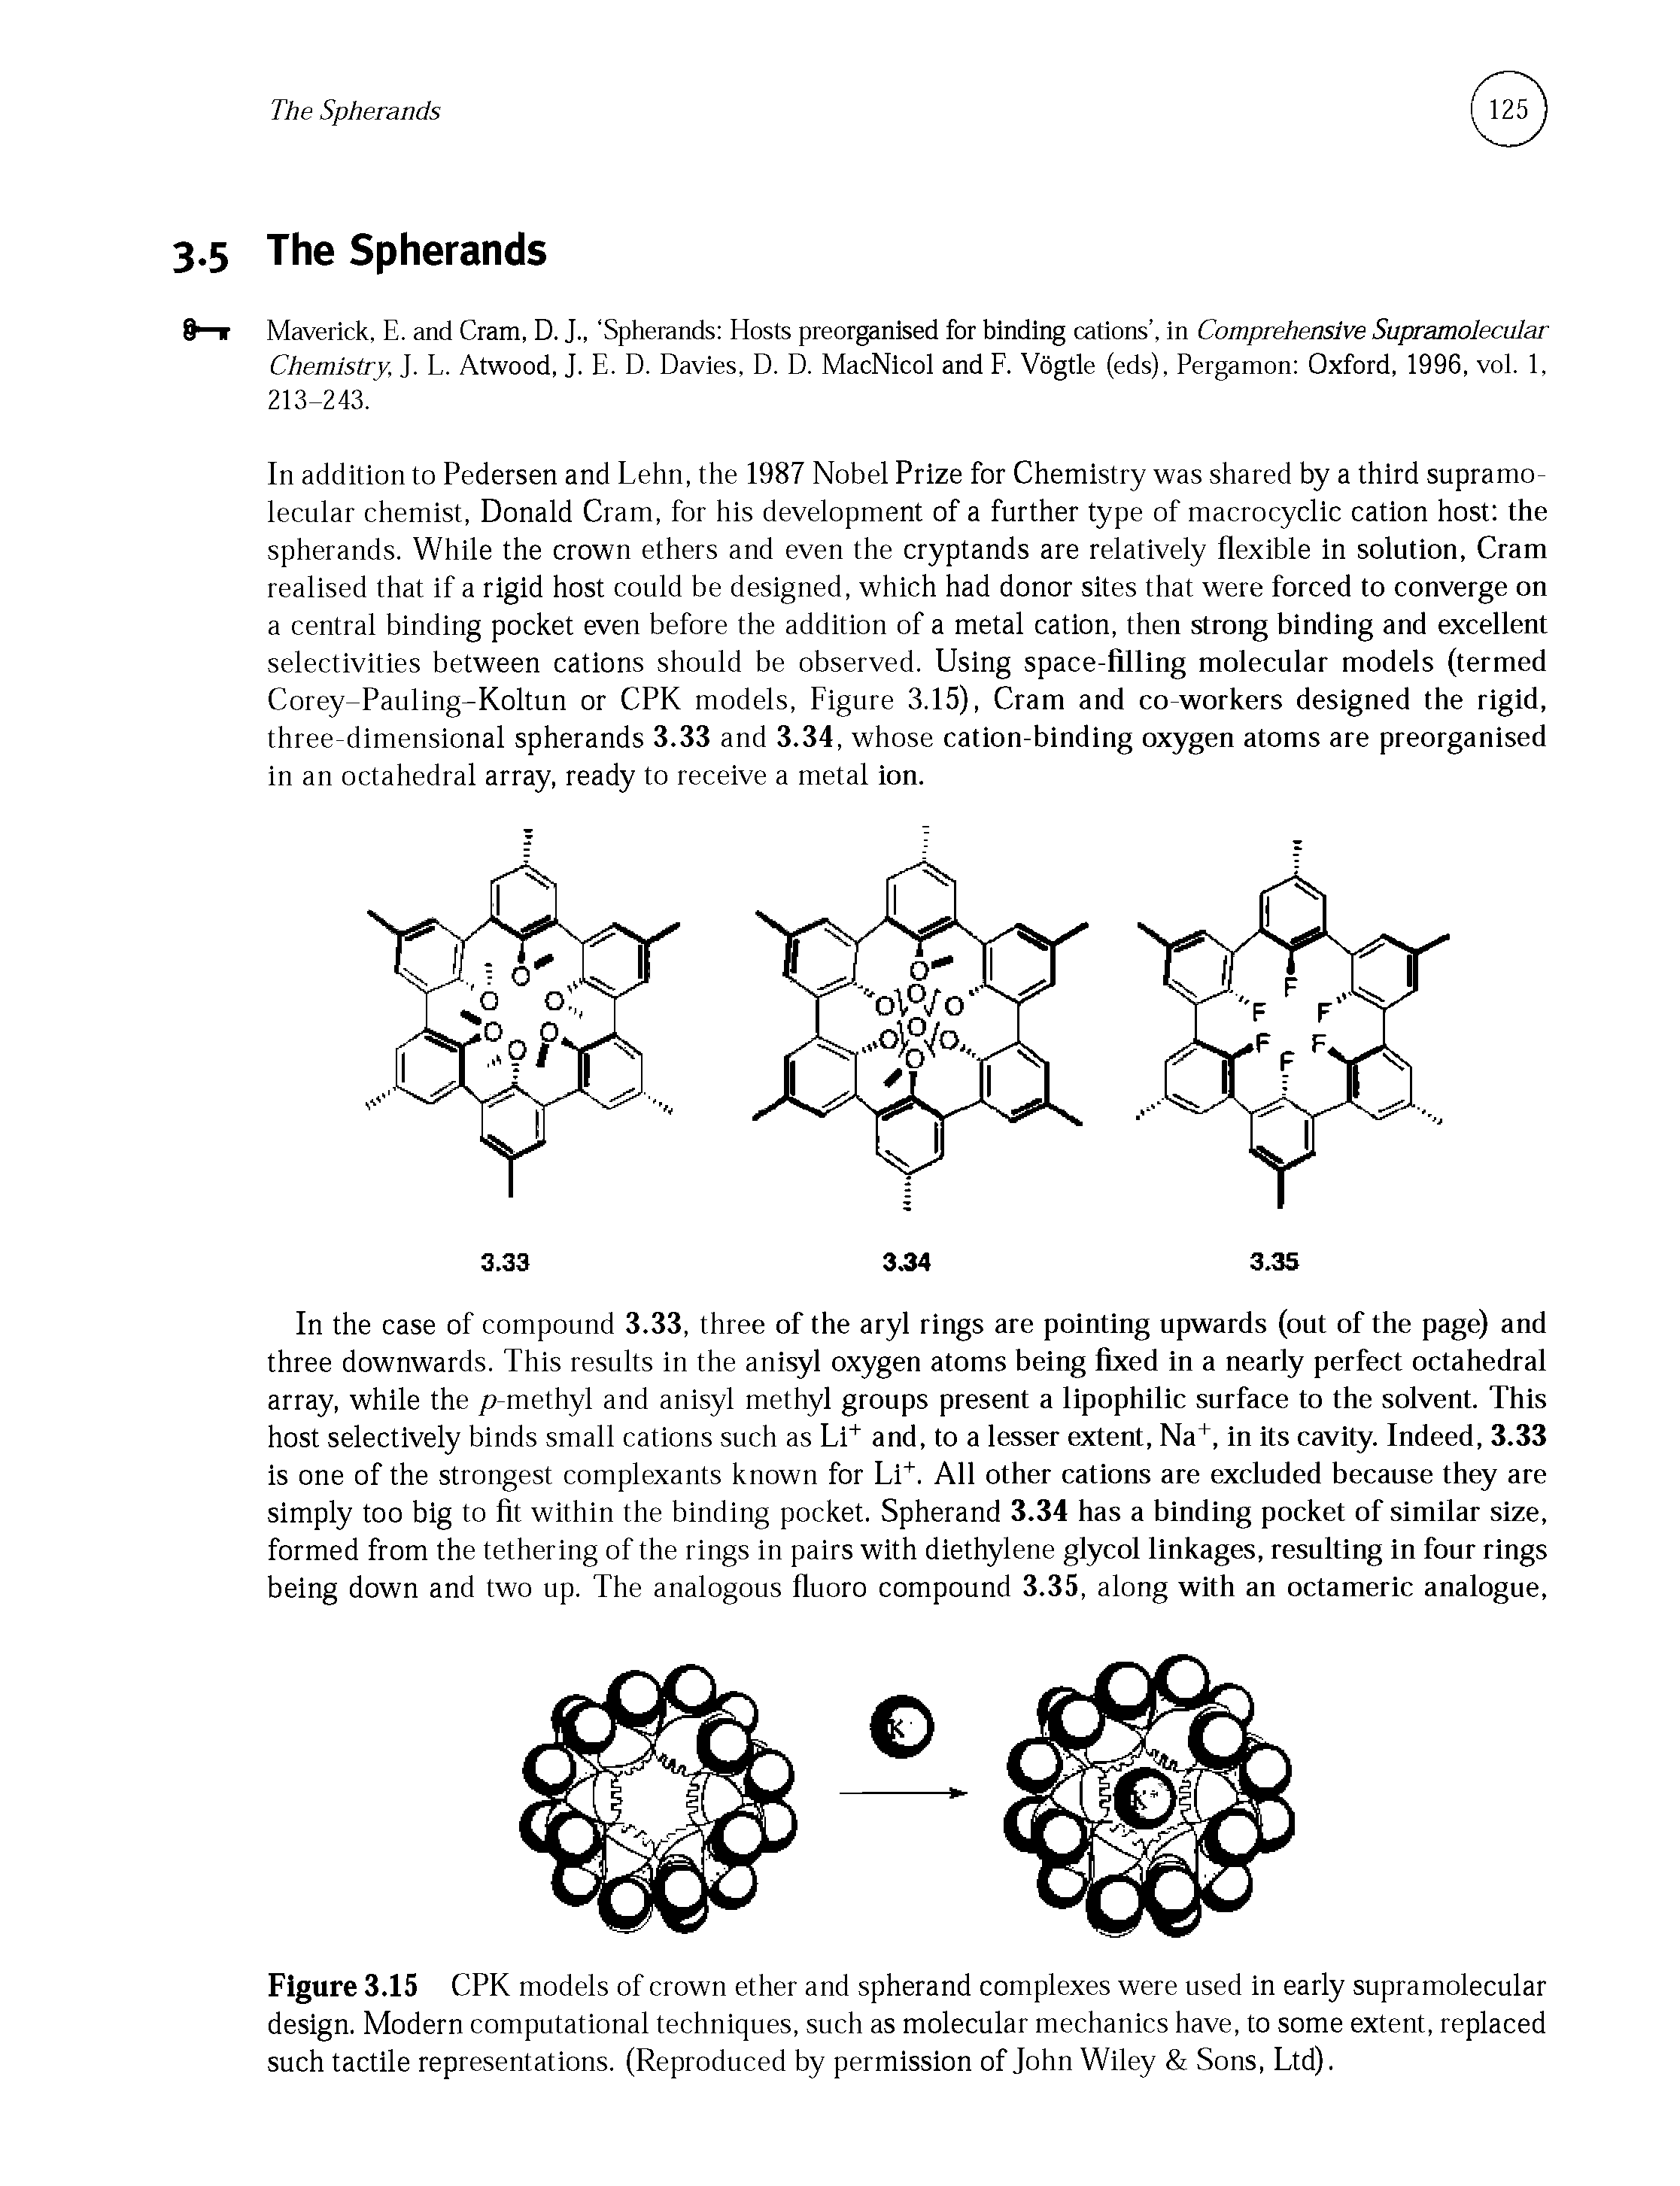 Figure 3.15 CPK models of crown ether and spherand complexes were used in early supramolecular design. Modern computational techniques, such as molecular mechanics have, to some extent, replaced such tactile representations. (Reproduced by permission of John Wiley Sons, Ltd).